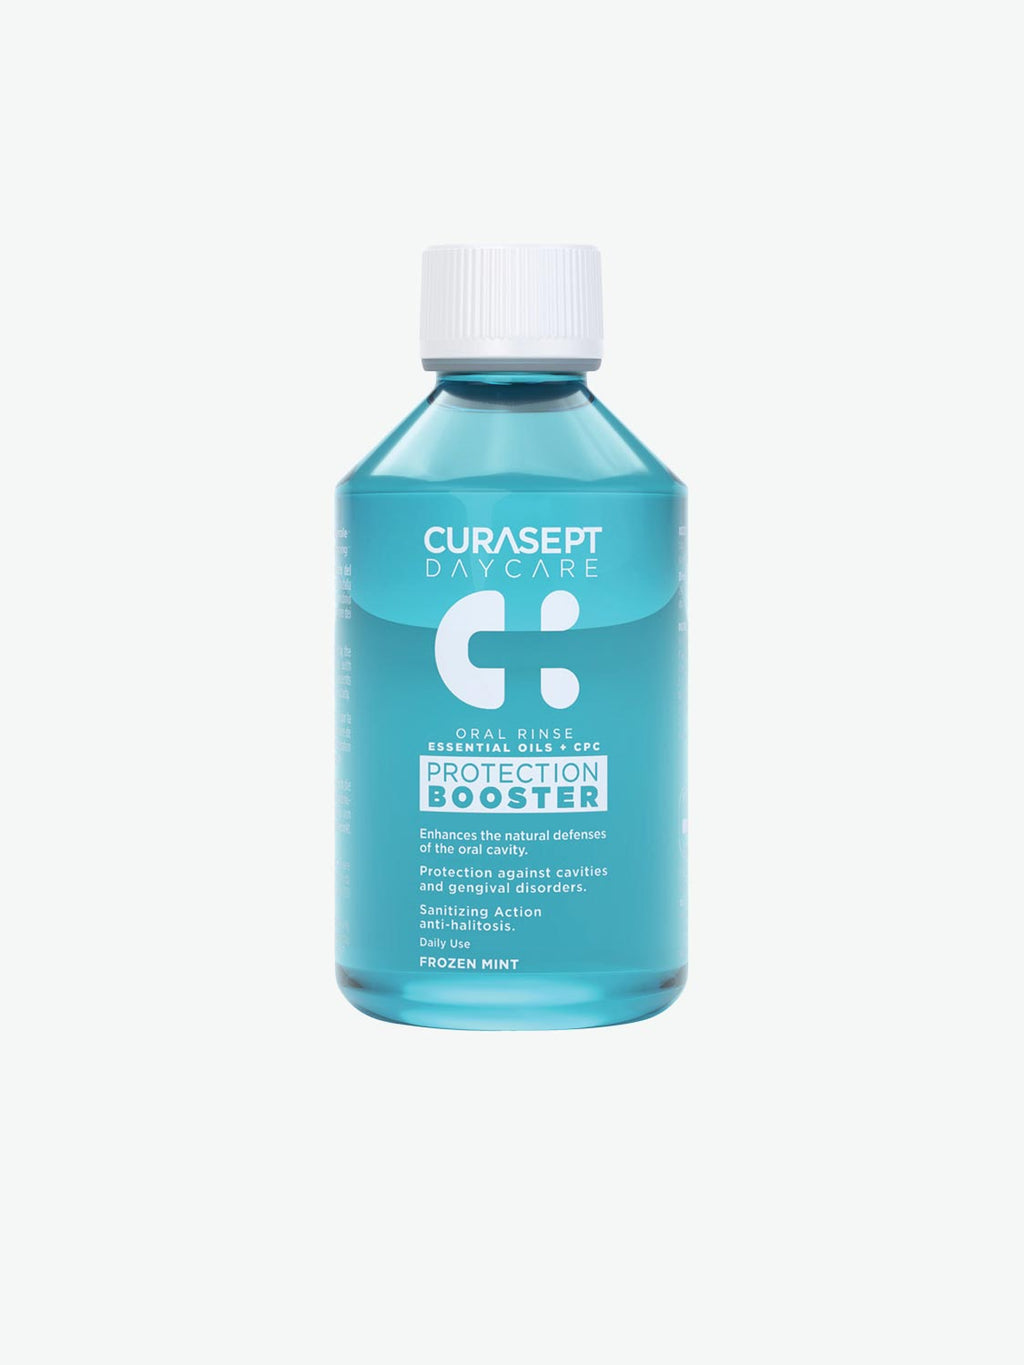 Curasept Daycare Mouthwash Protection Booster Frozen Mint